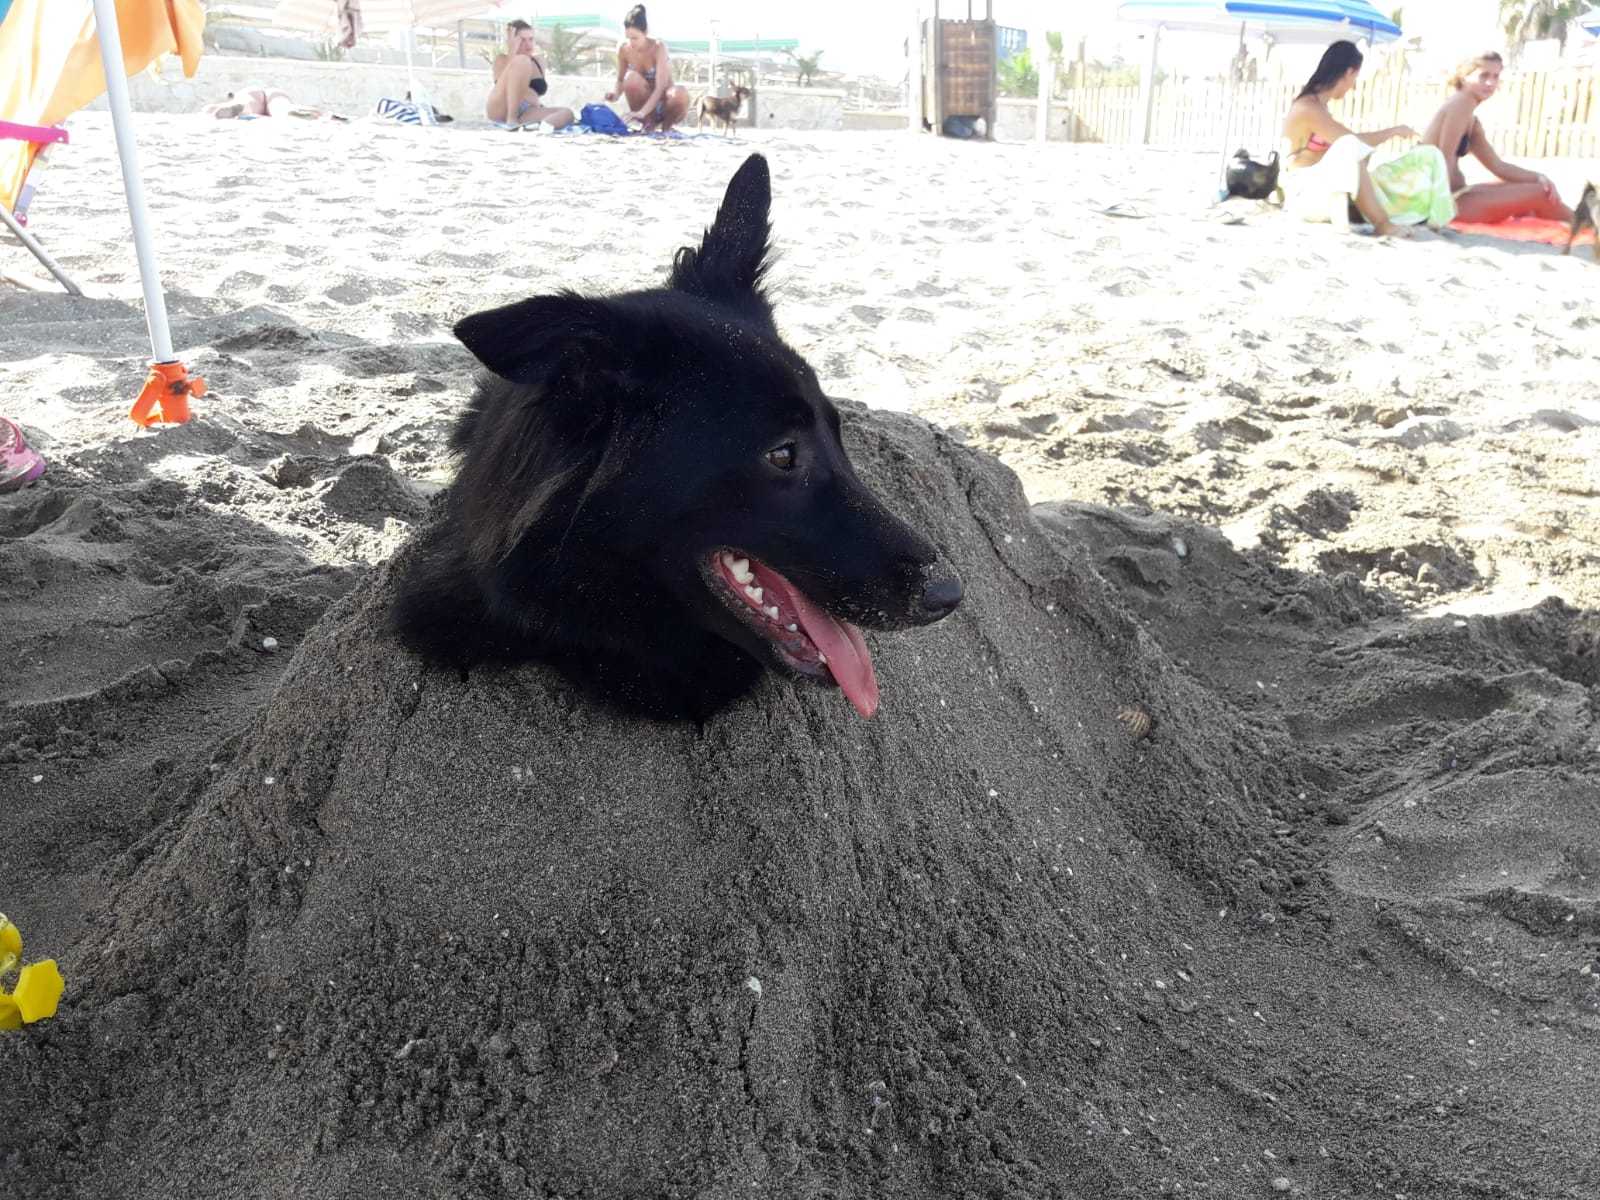 Doggo buried in sand, people need to see this - meme